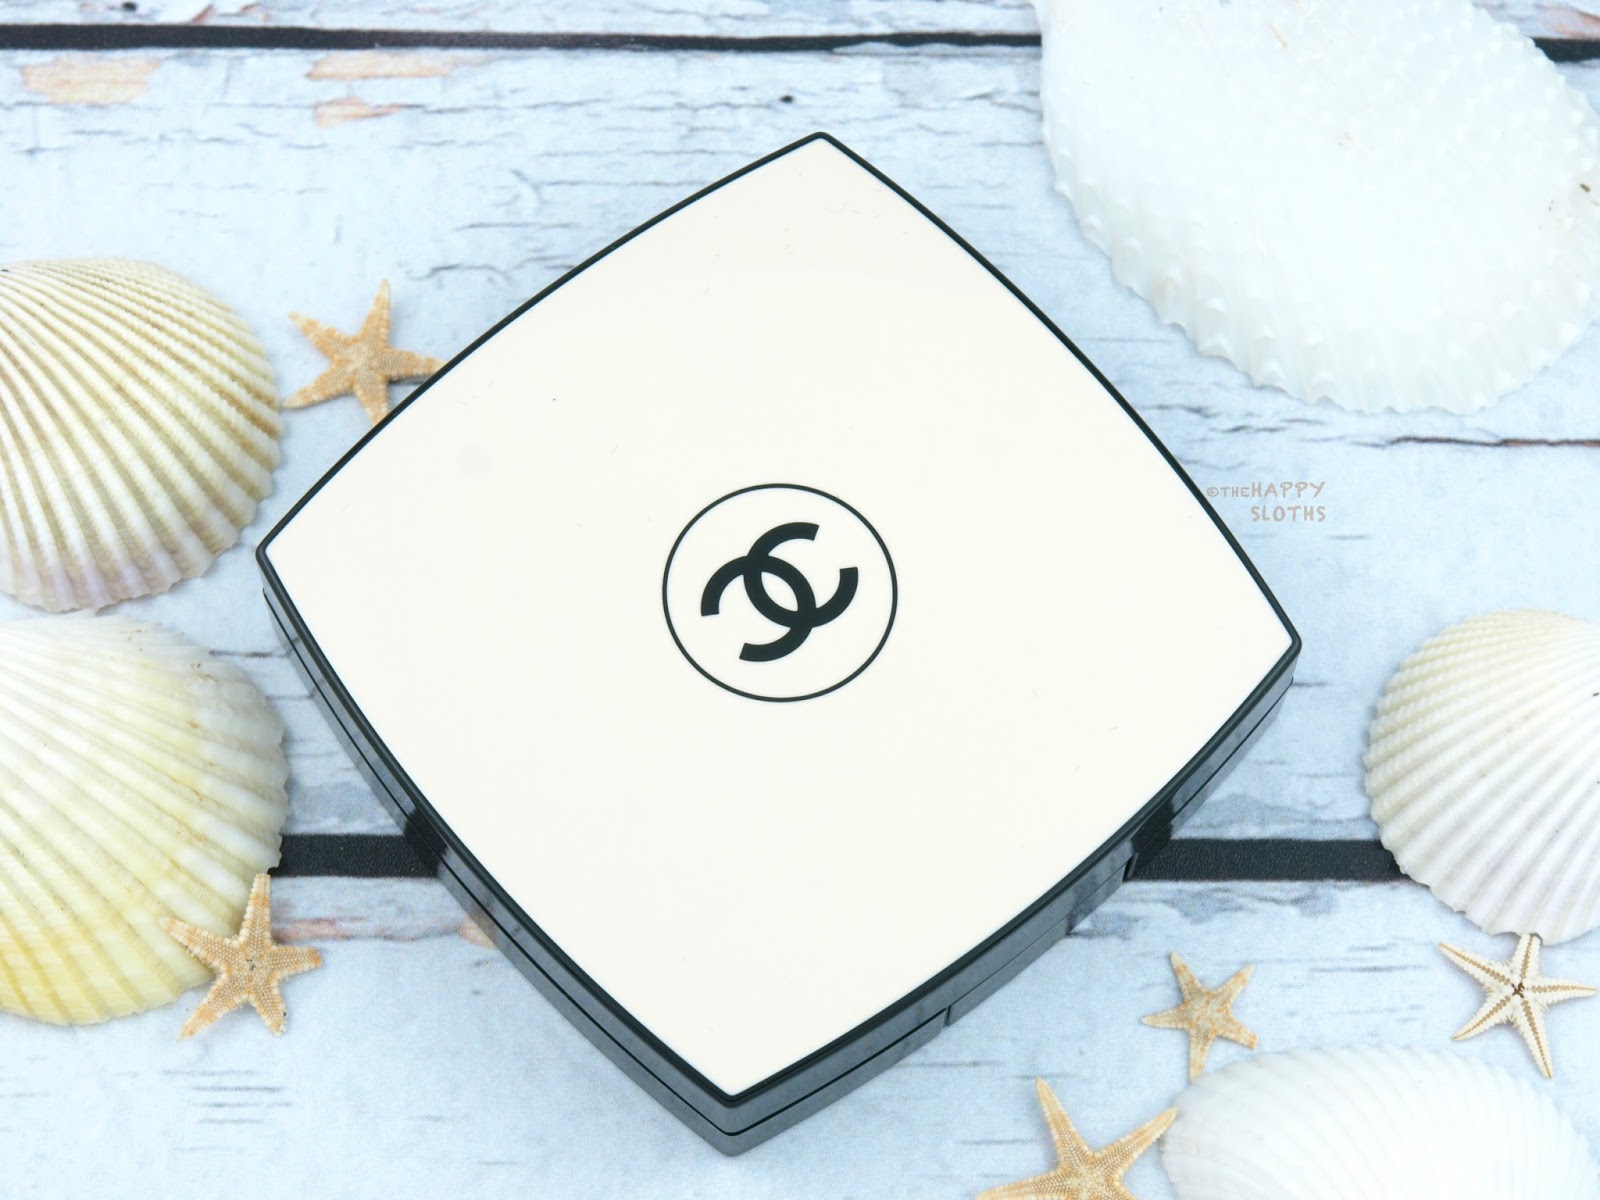 Chanel Summer 2017 Cruise Collection Les Beiges Poudre Belle Mine Ensoleillee in "Light": Review and Swatches